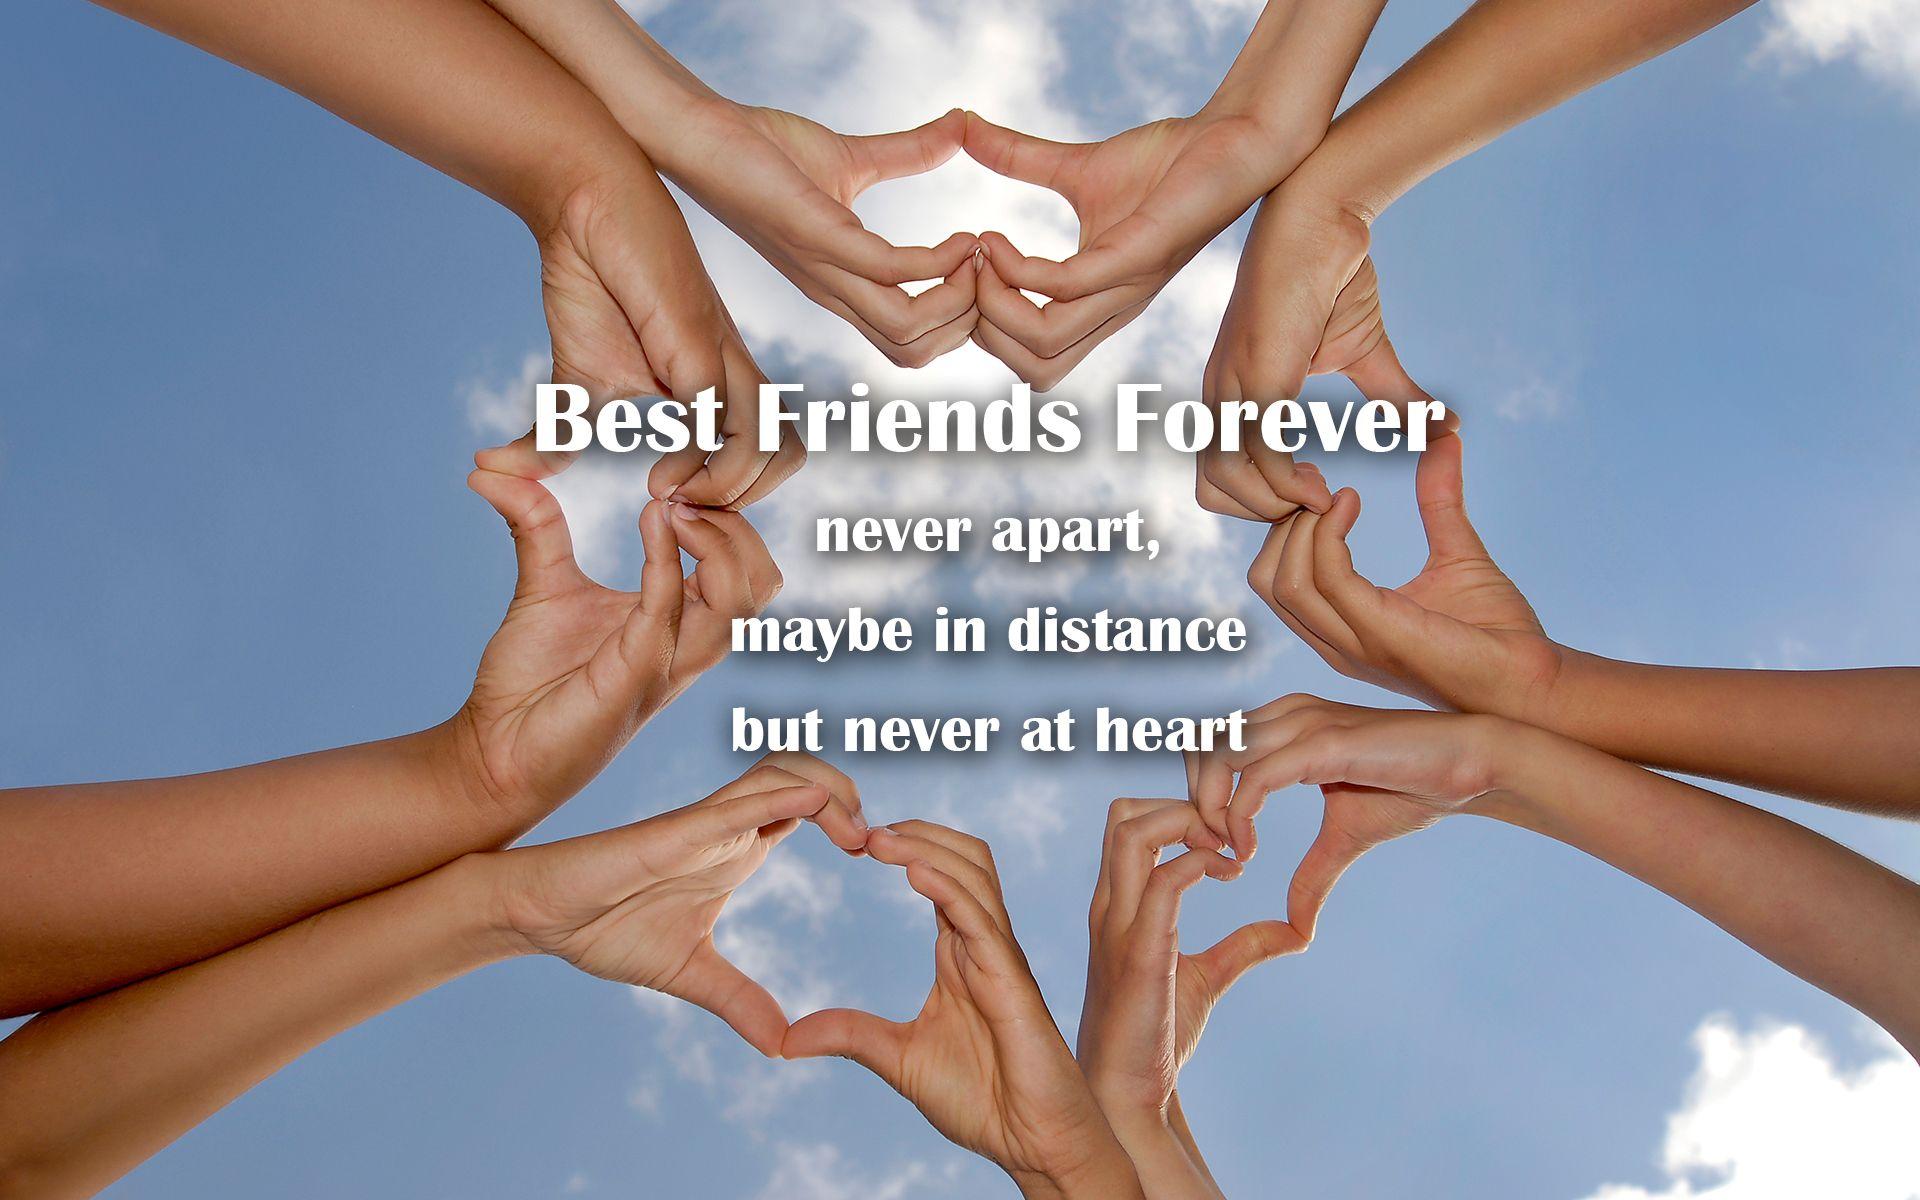 friends forever wallpapers for mobile